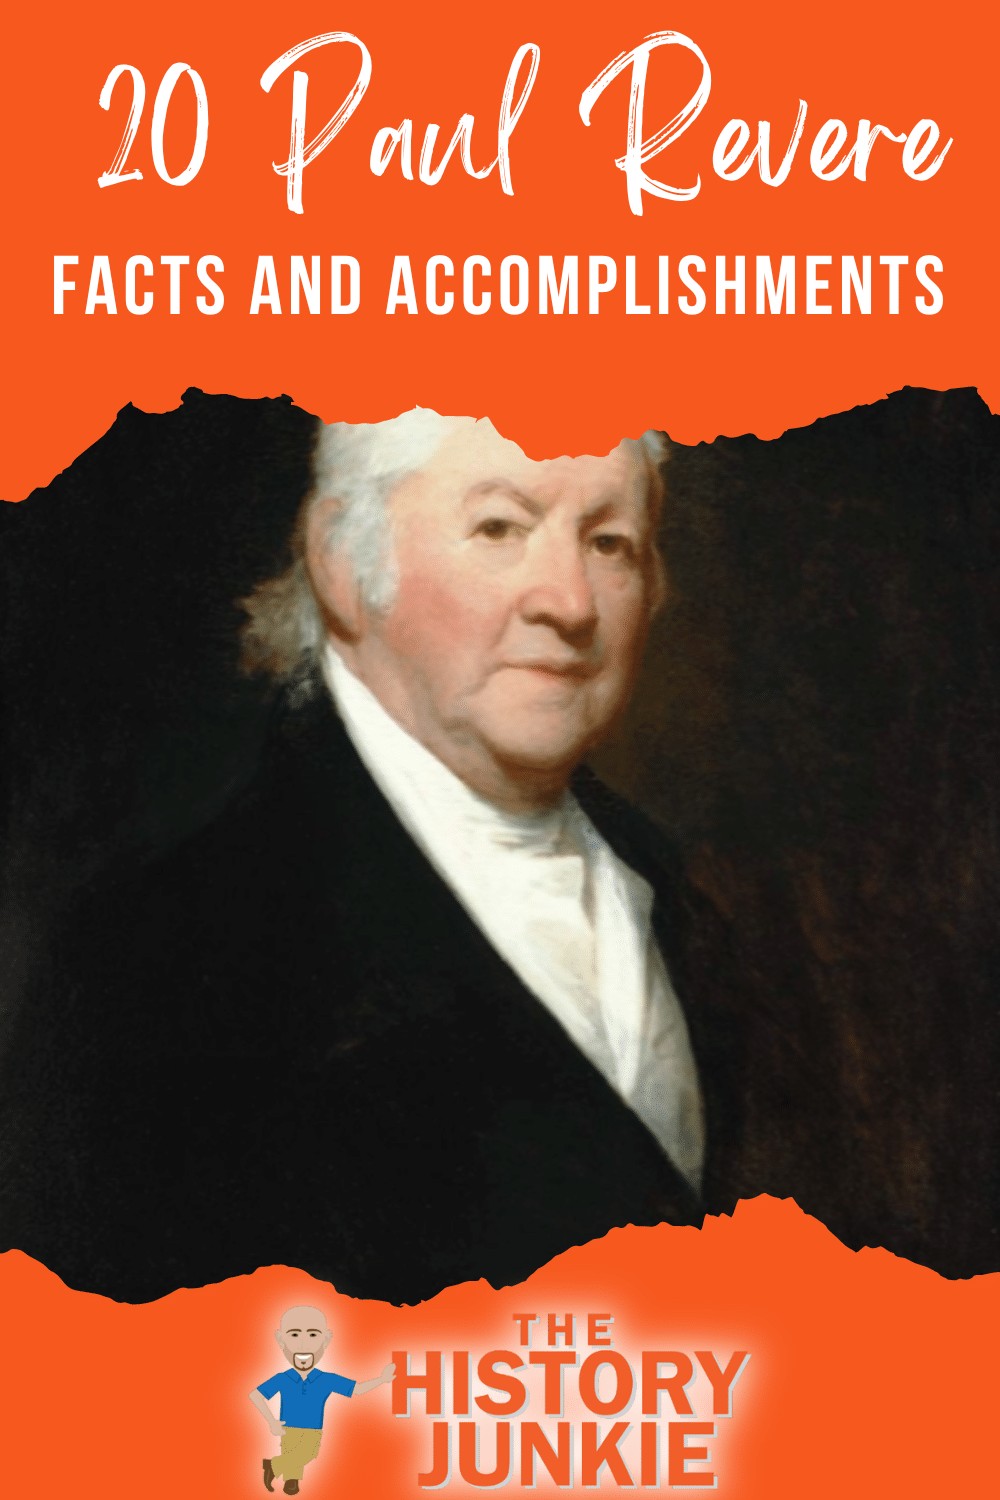 Paul Revere Facts and Accomplishments